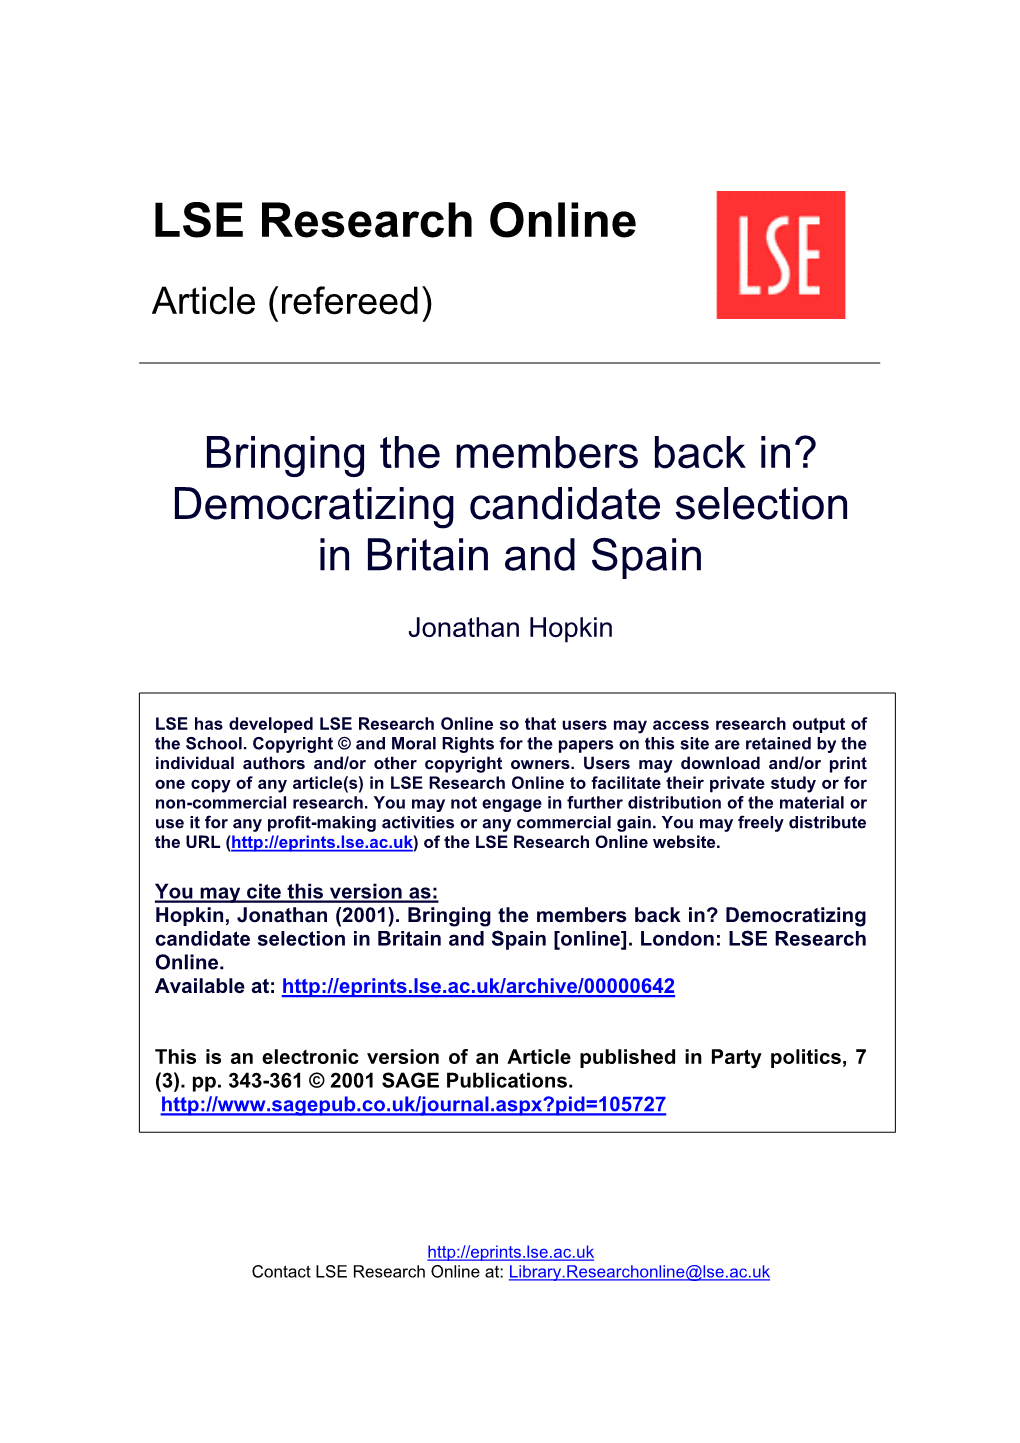 Bringing the Members Back In? Democratizing Candidate Selection in Britain and Spain